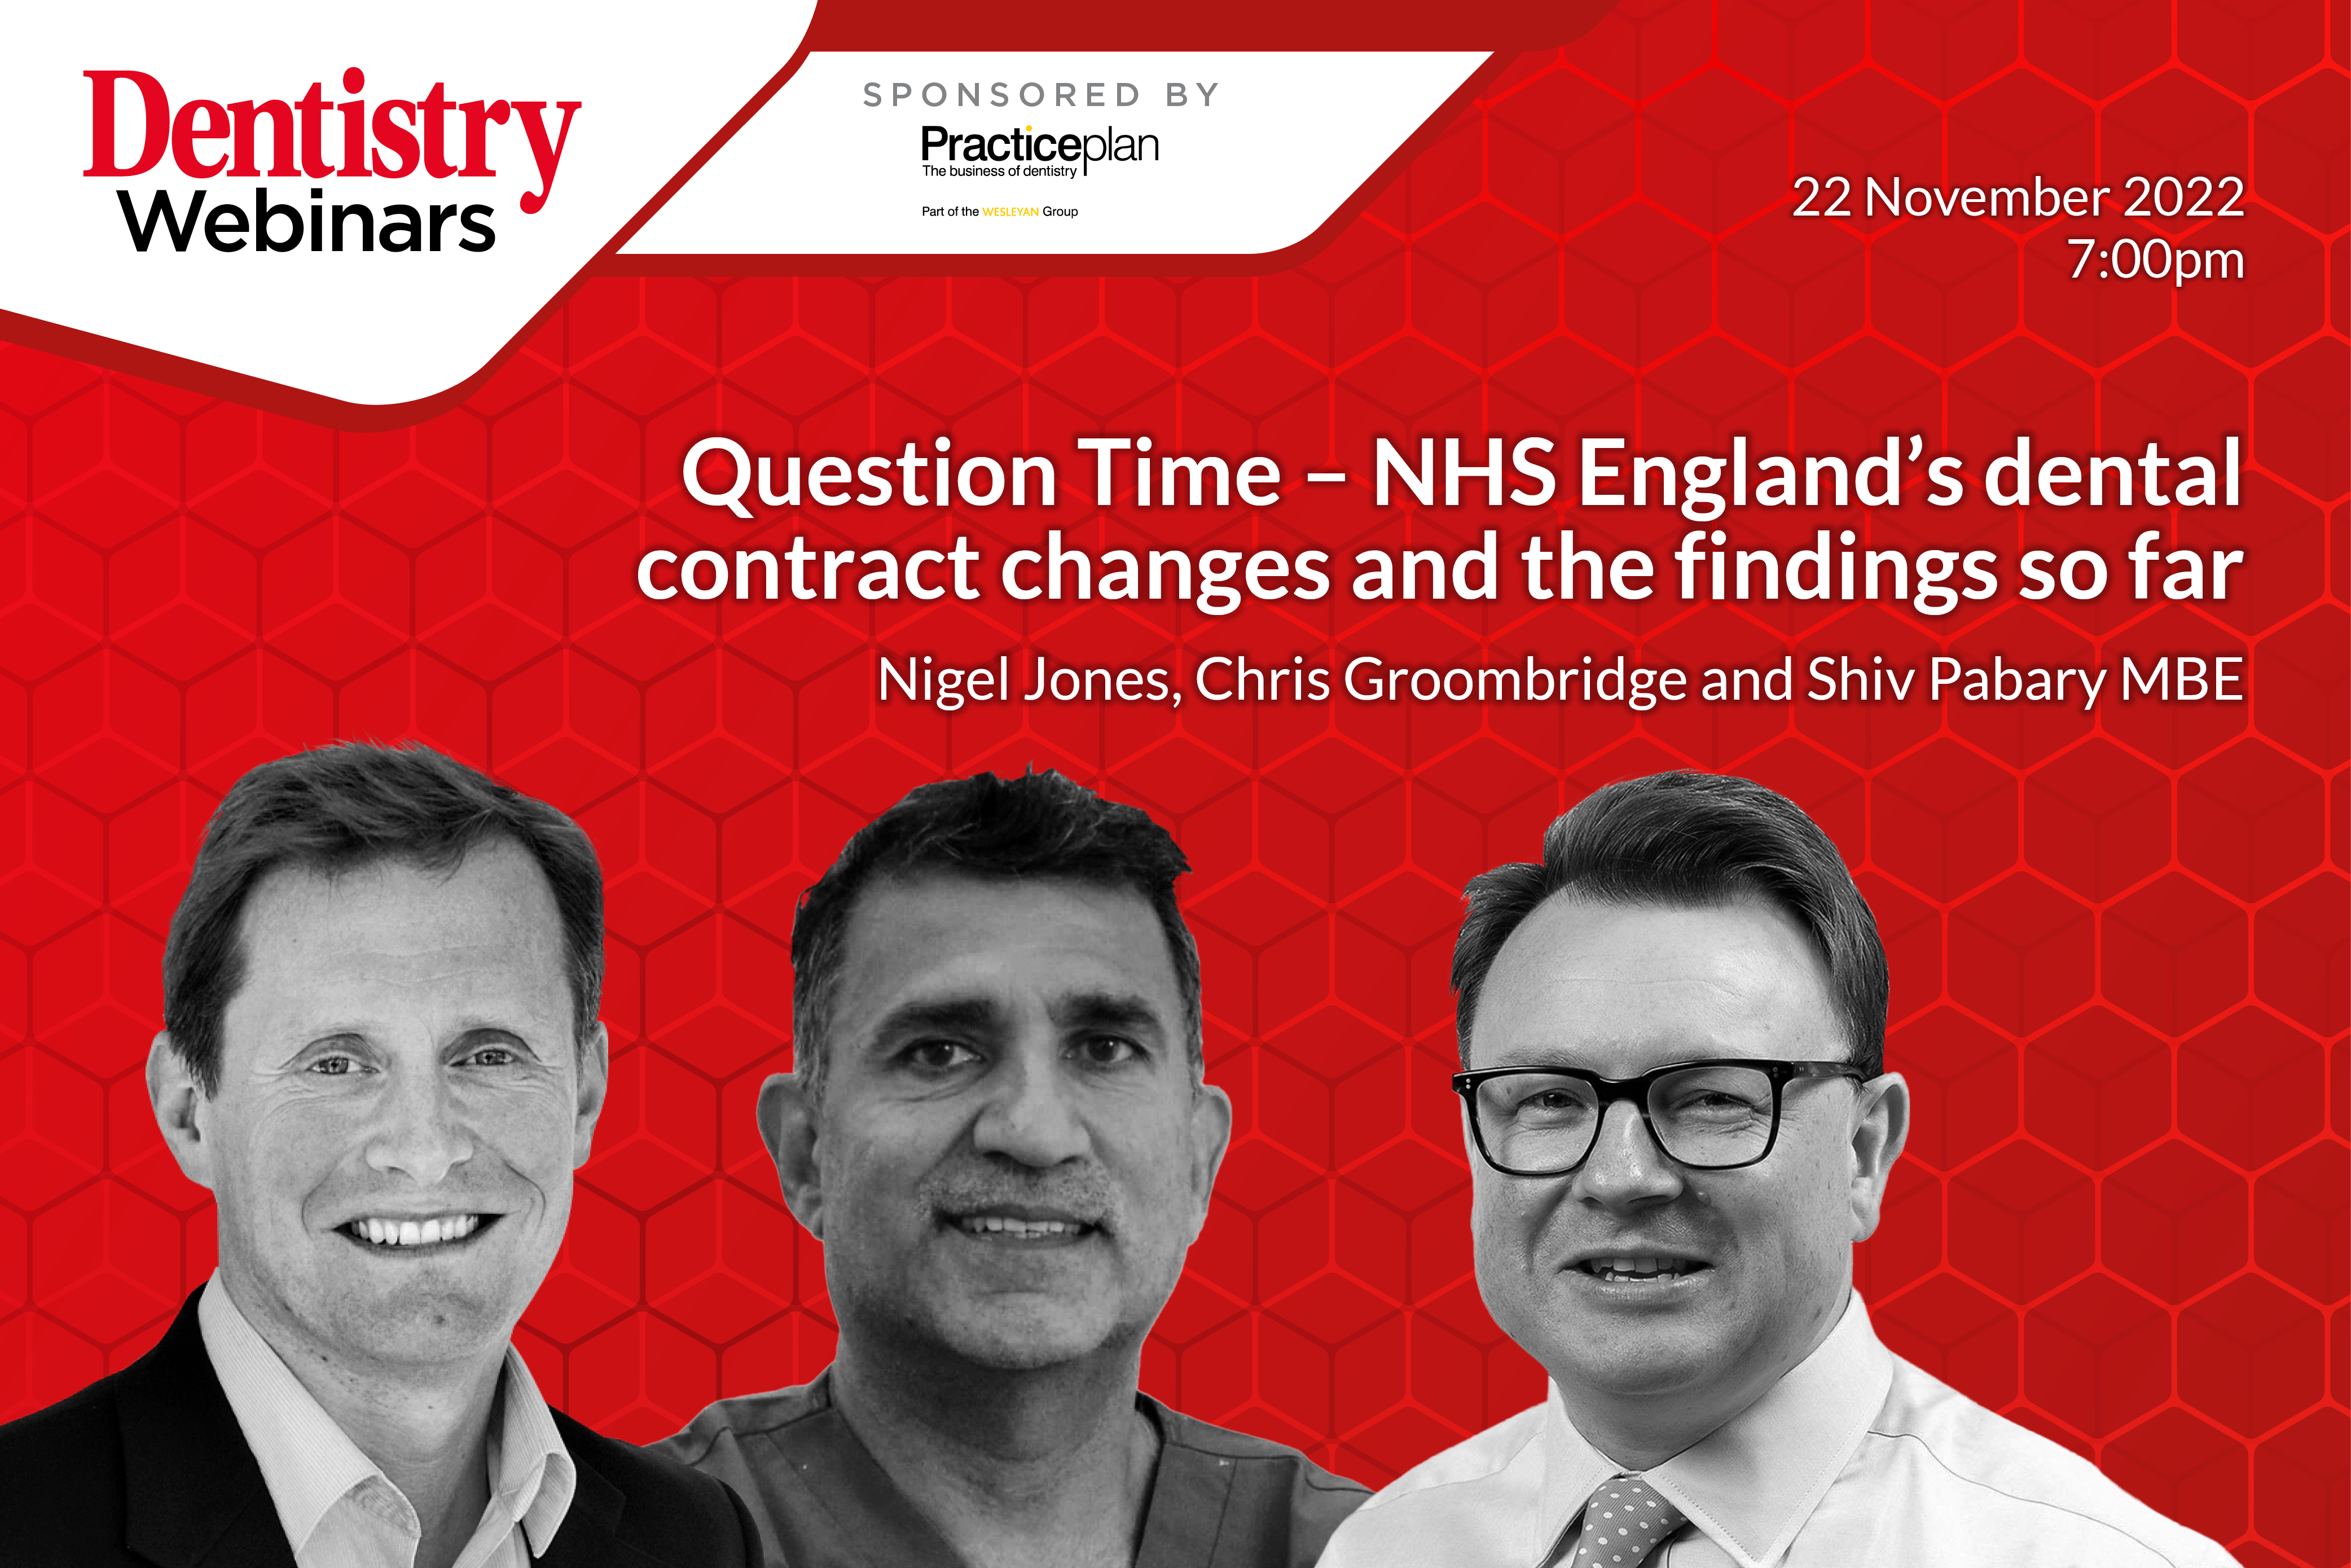 Join Nigel Jones, Chris Groombridge and Shiv Pabary MBE on Tuesday 22 November at 7pm for a Question Time discussion of the NHS dental contract changes.